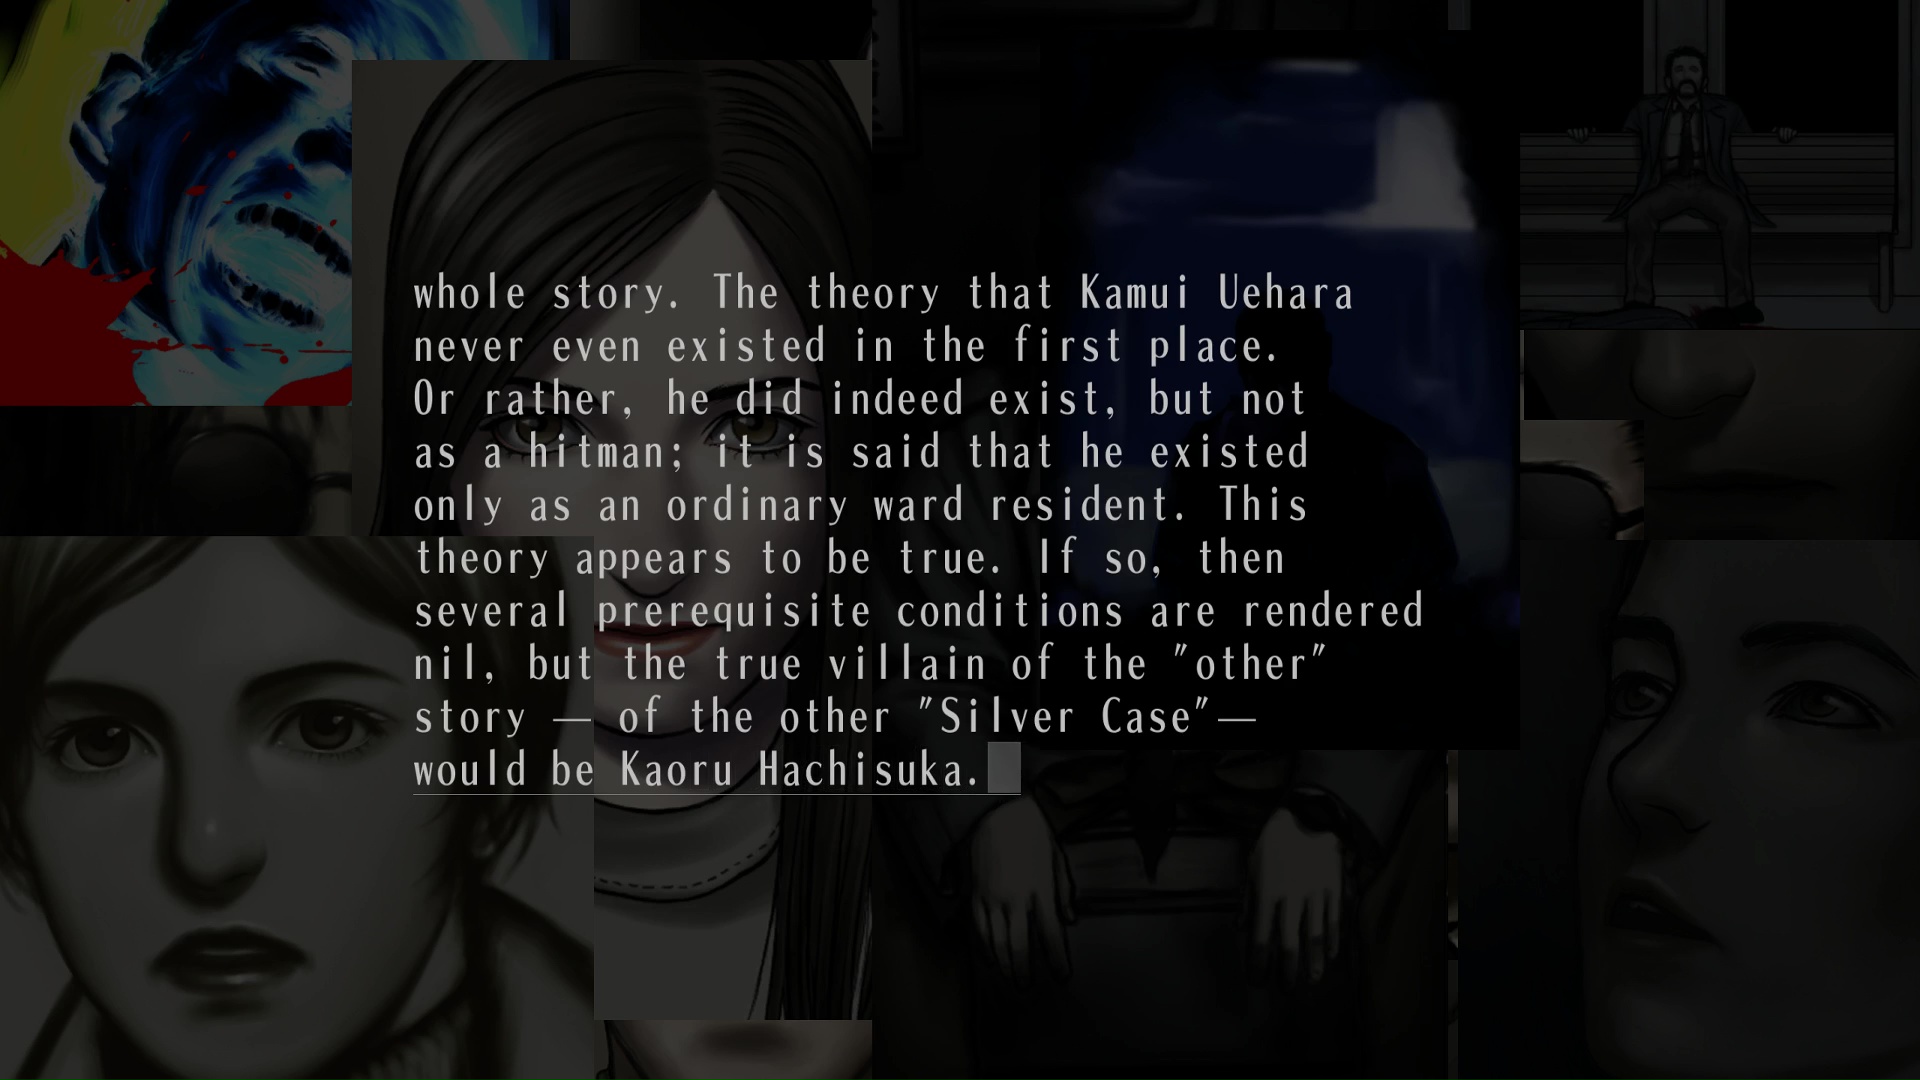 Screenshot of "UTSUTSU." A collage of character art from The SIlver Case is darkened in the background, showing Enzawa, Shimohira Ayame, Munakata, Sakura, Kusabi, Sumio, and the imposter Inohana. Over the collage is white text: "The theory that Kamui Uehara never even existed in the first place. Or rather, he did indeed exist, but not as a hitman; it is said that he existed only as an ordinary ward resident. This theory appears to be true. If so, then several prerequisite conditions are rendered nil, but the true villain of the 'other' story — of the other 'Silver Case' — would be Kaoru Hachisuka."